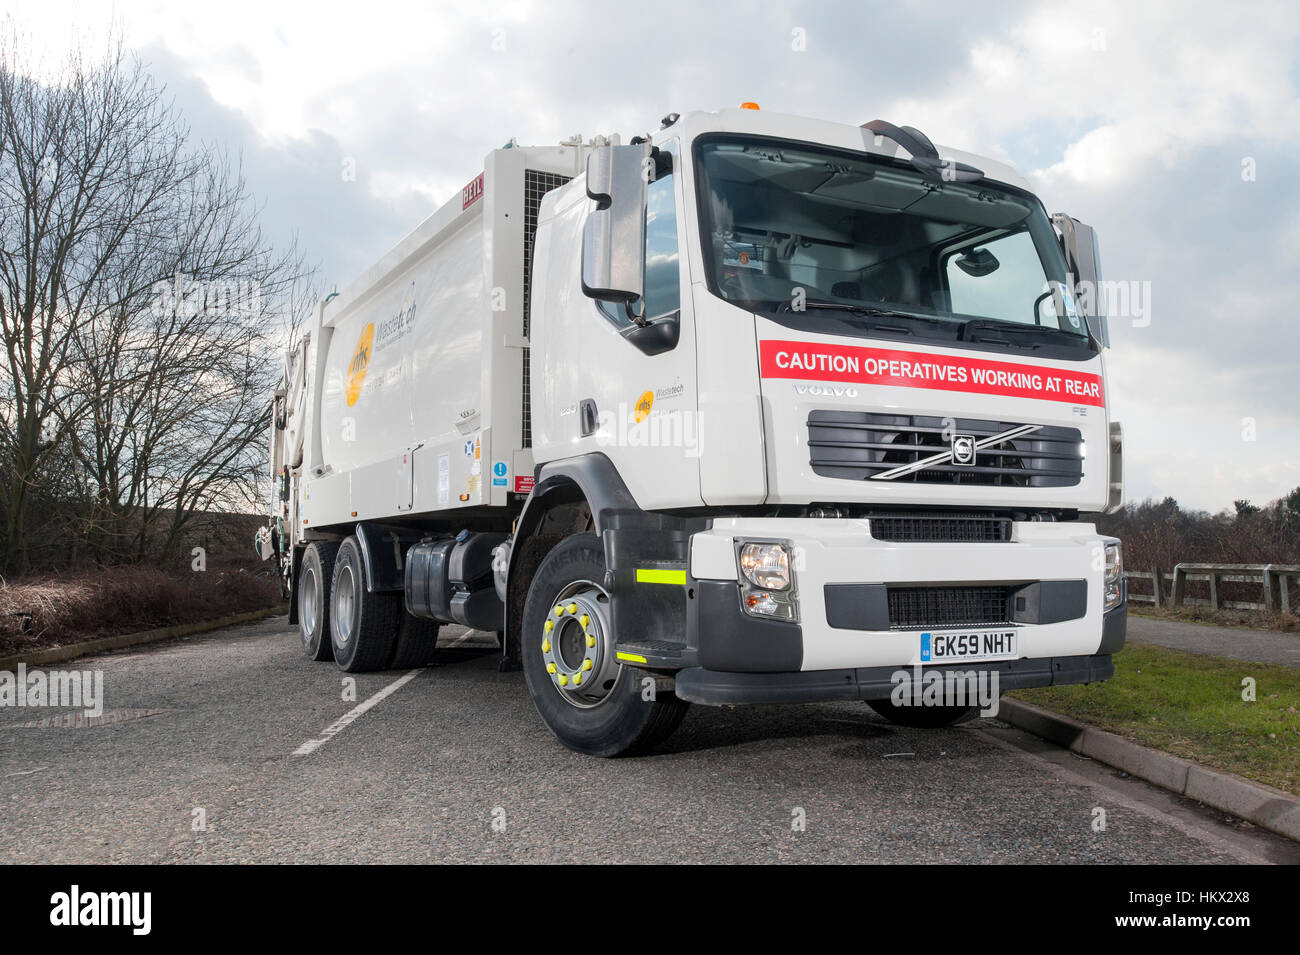 2009 Volvo FE dustcart refuse collection truck Stock Photo